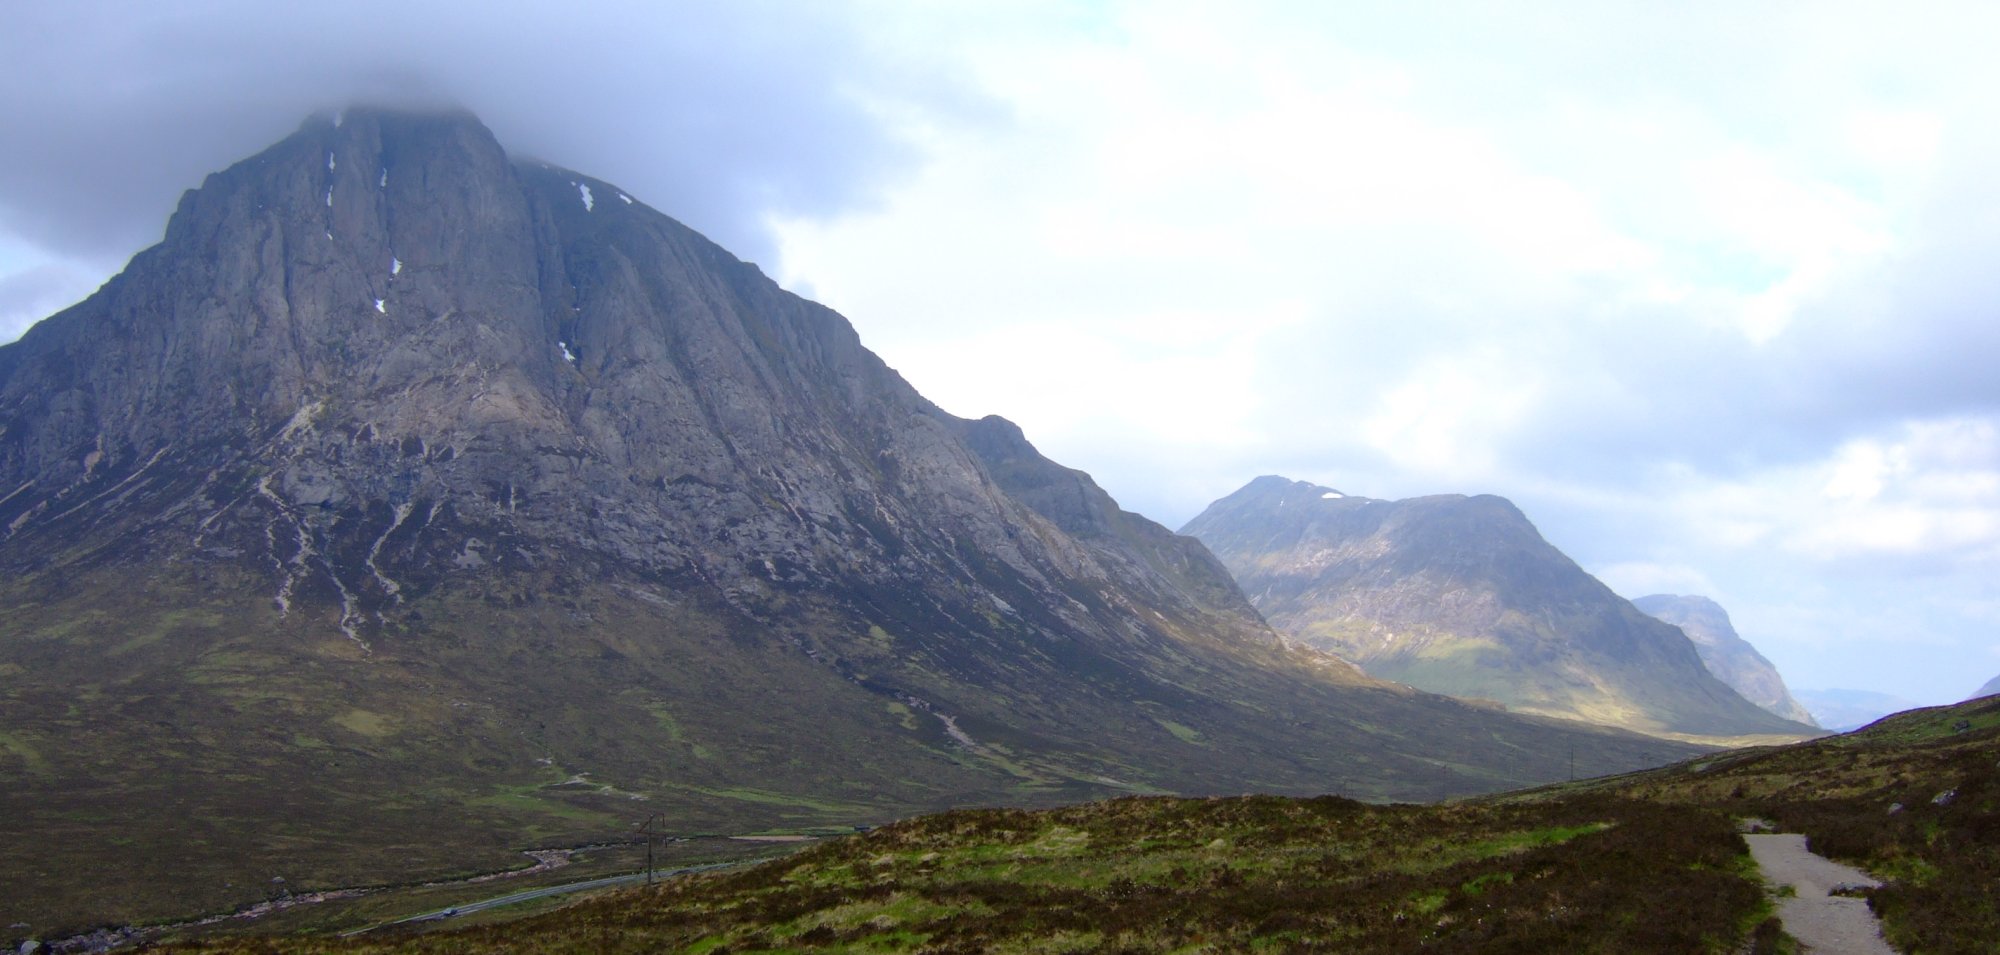 Buachaille Etive Mor with Buachaille Etive Beag beyond and the first of the Three Sisters, Beinn Fhada, in the distance